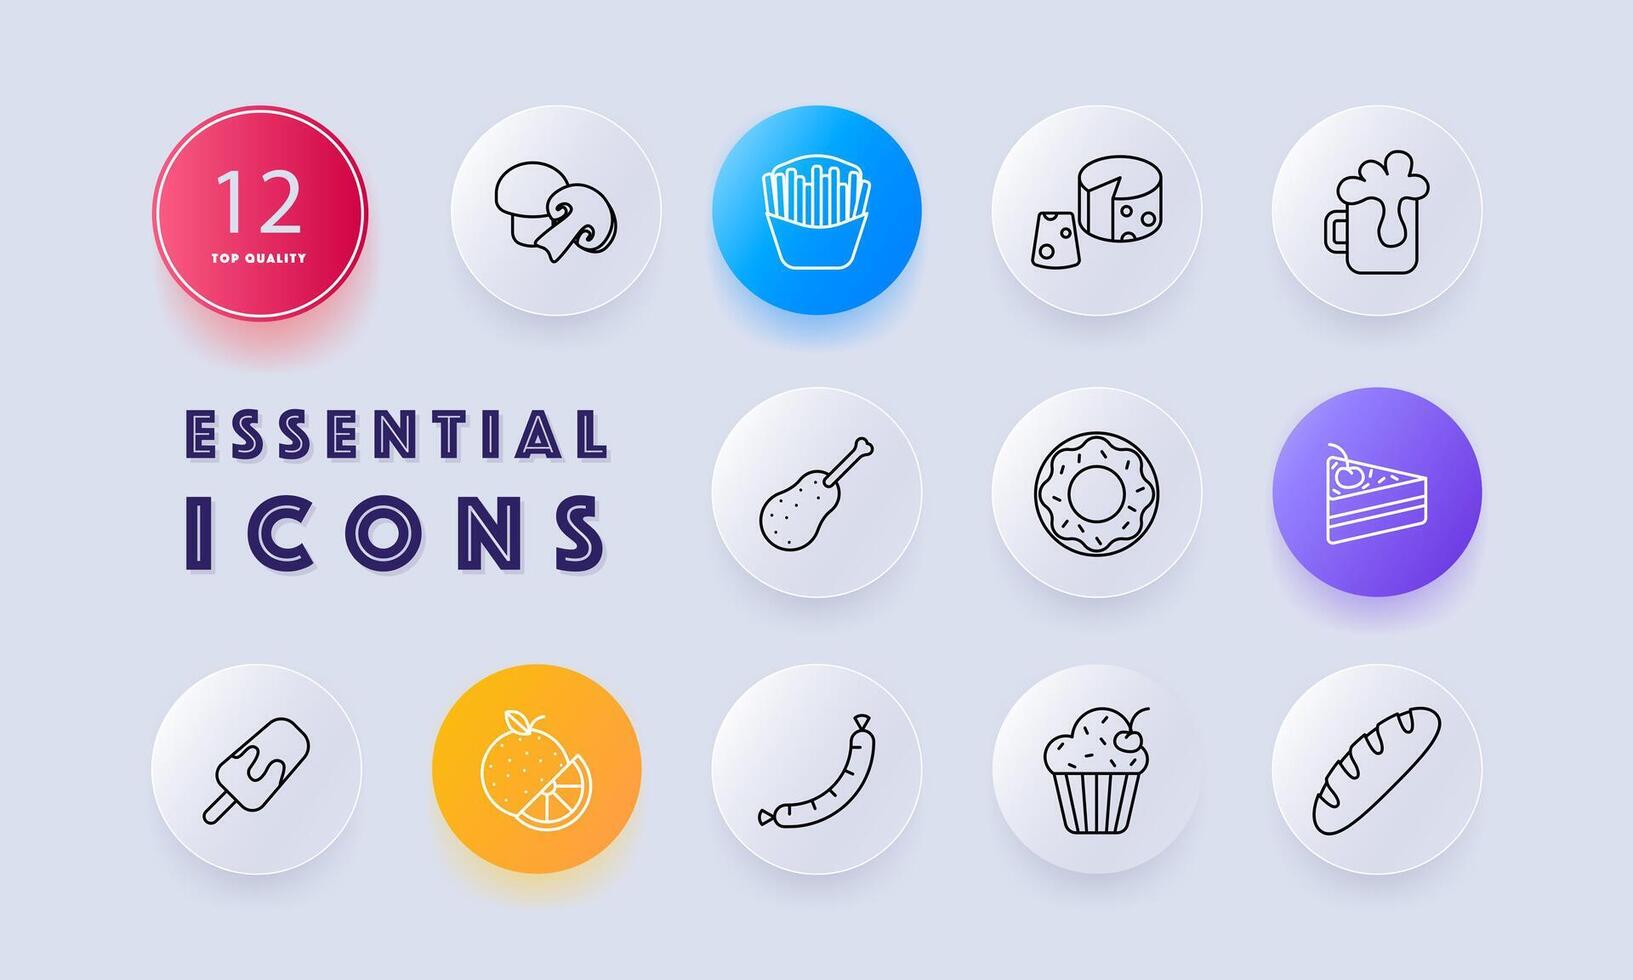 Delicacy set icon. Mushrooms, cheese with holes, cupcake, baguette, ice cream, donut, french fries, fast food, junk food, cherry, cake, sausage, drink, unusual food. Neomorphism style. vector